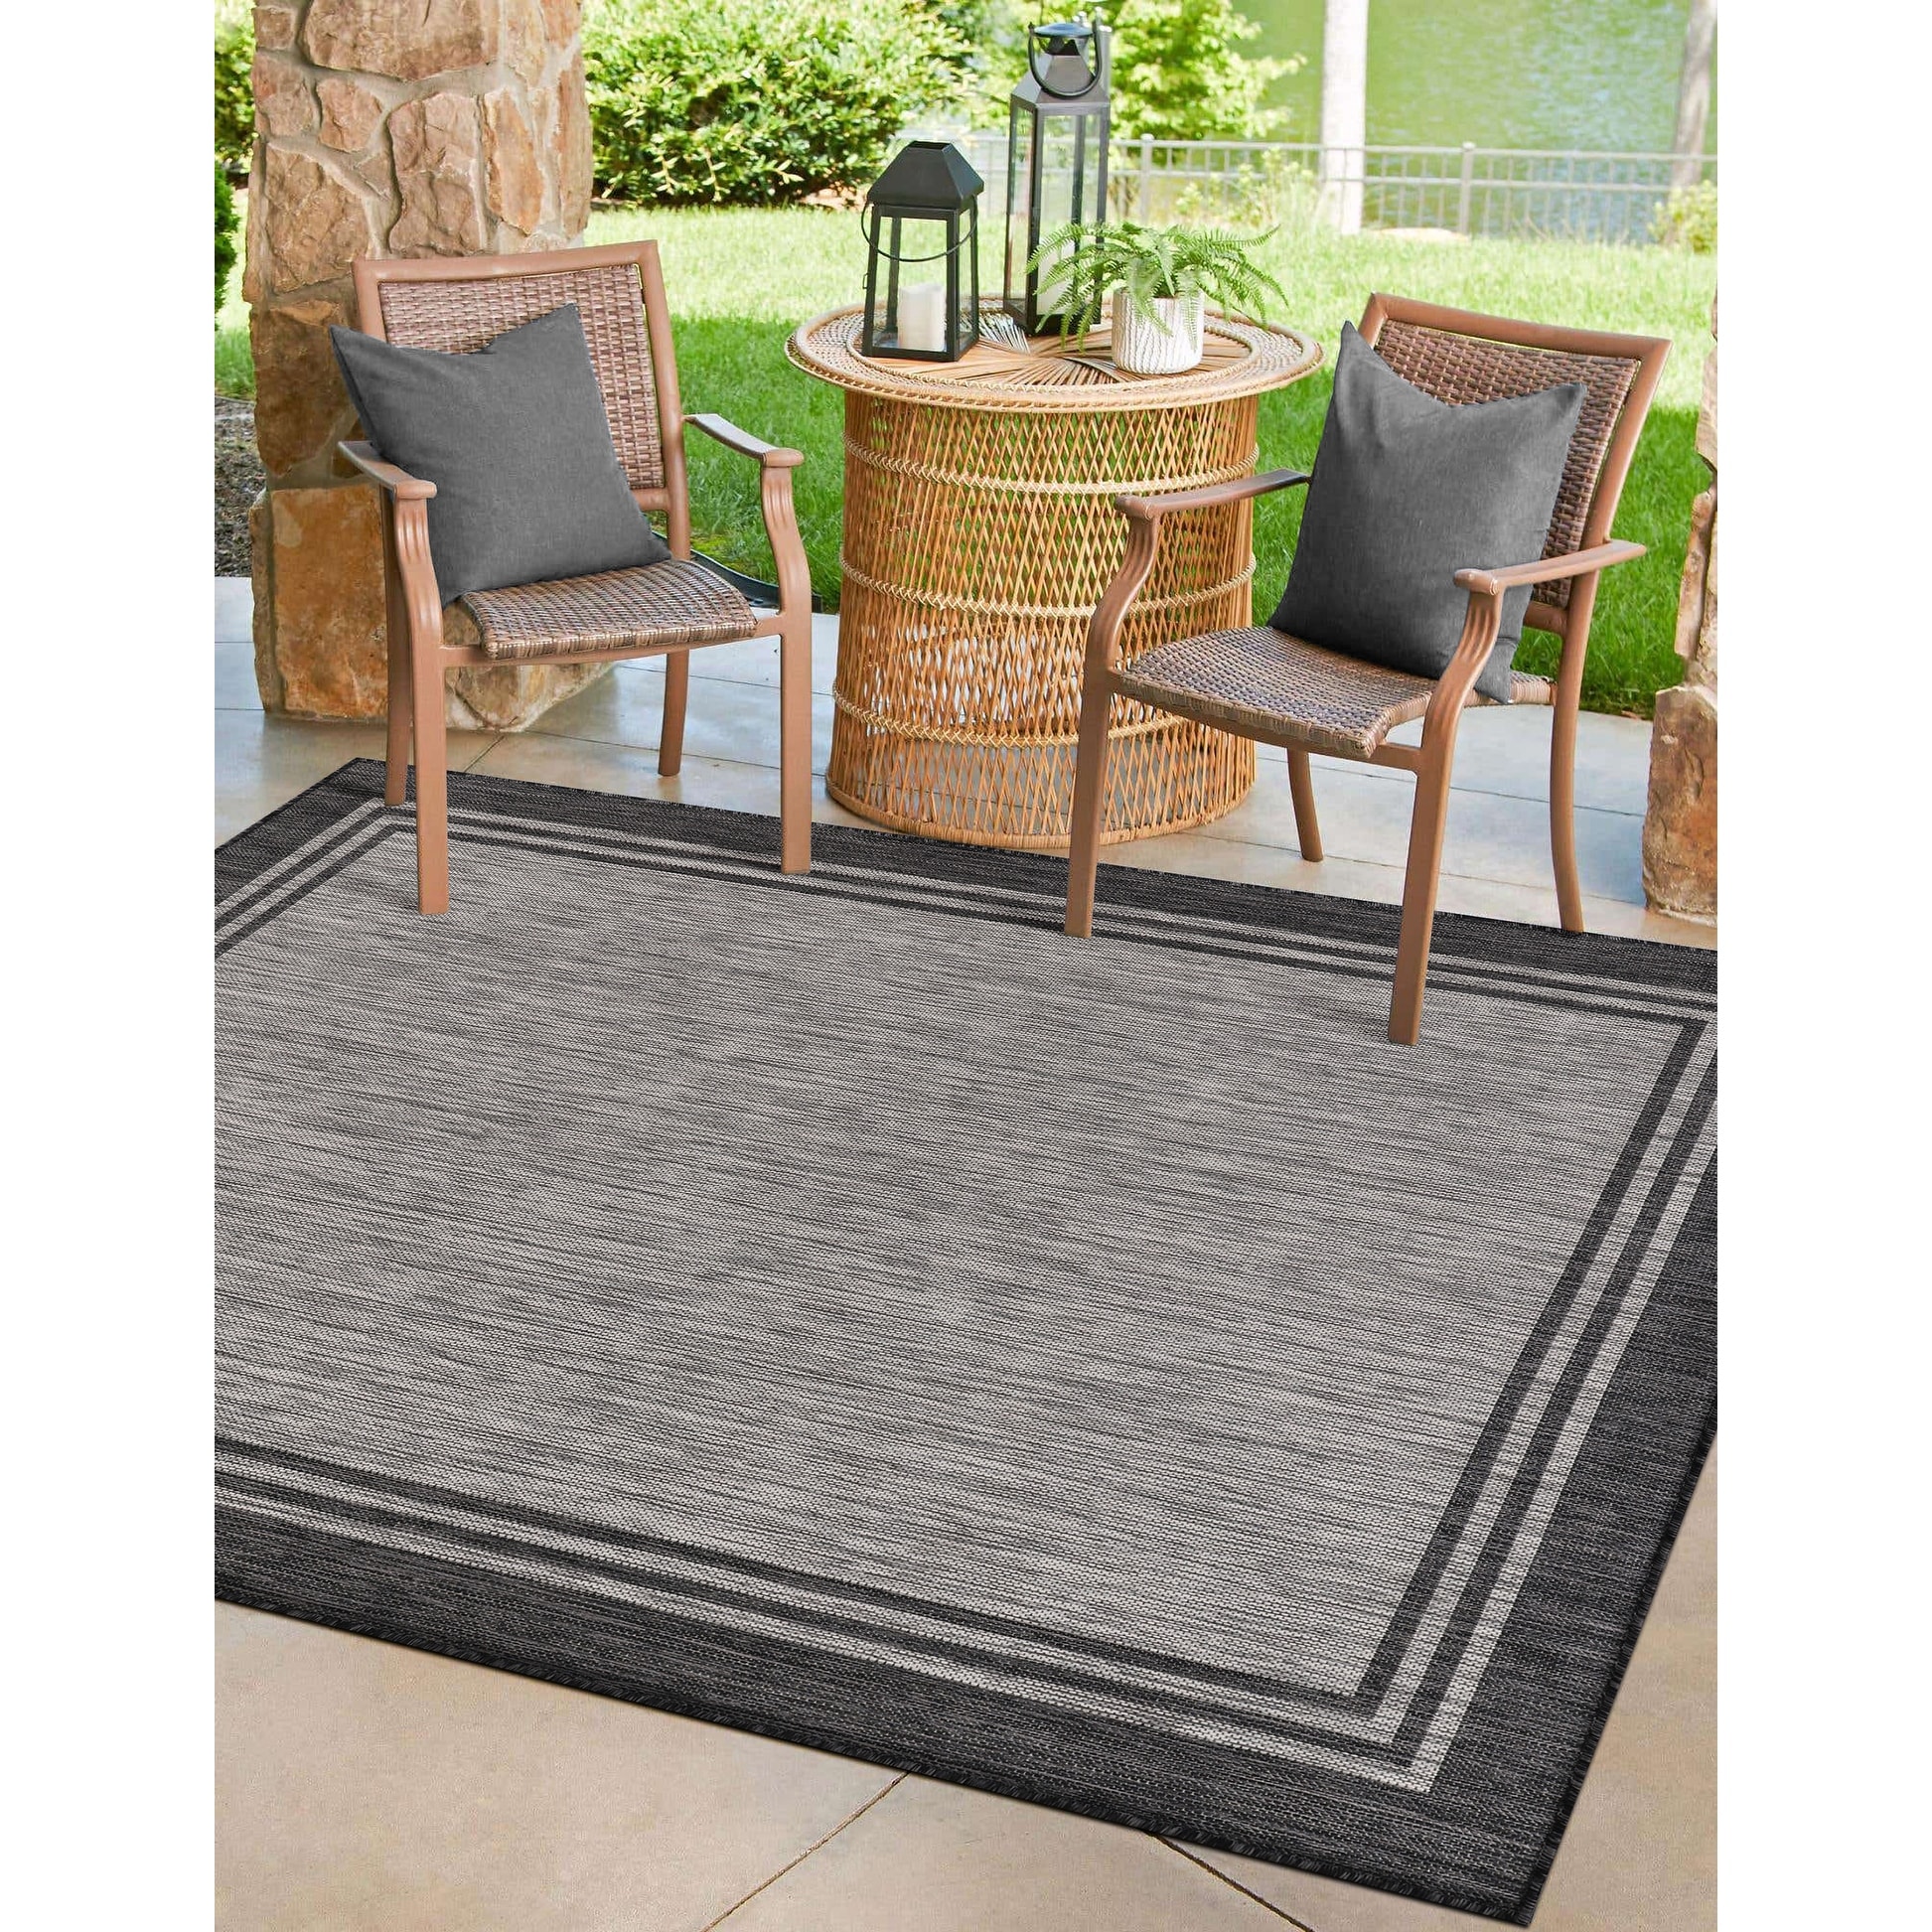 https://ak1.ostkcdn.com/images/products/is/images/direct/c2af2d1ebac4aab6c84a595fb2eaeb5968a358e0/Washable-Bordered-Indoor-Outdoor-Rug-for-Patio%2C-Deck%2C-Porch.jpg